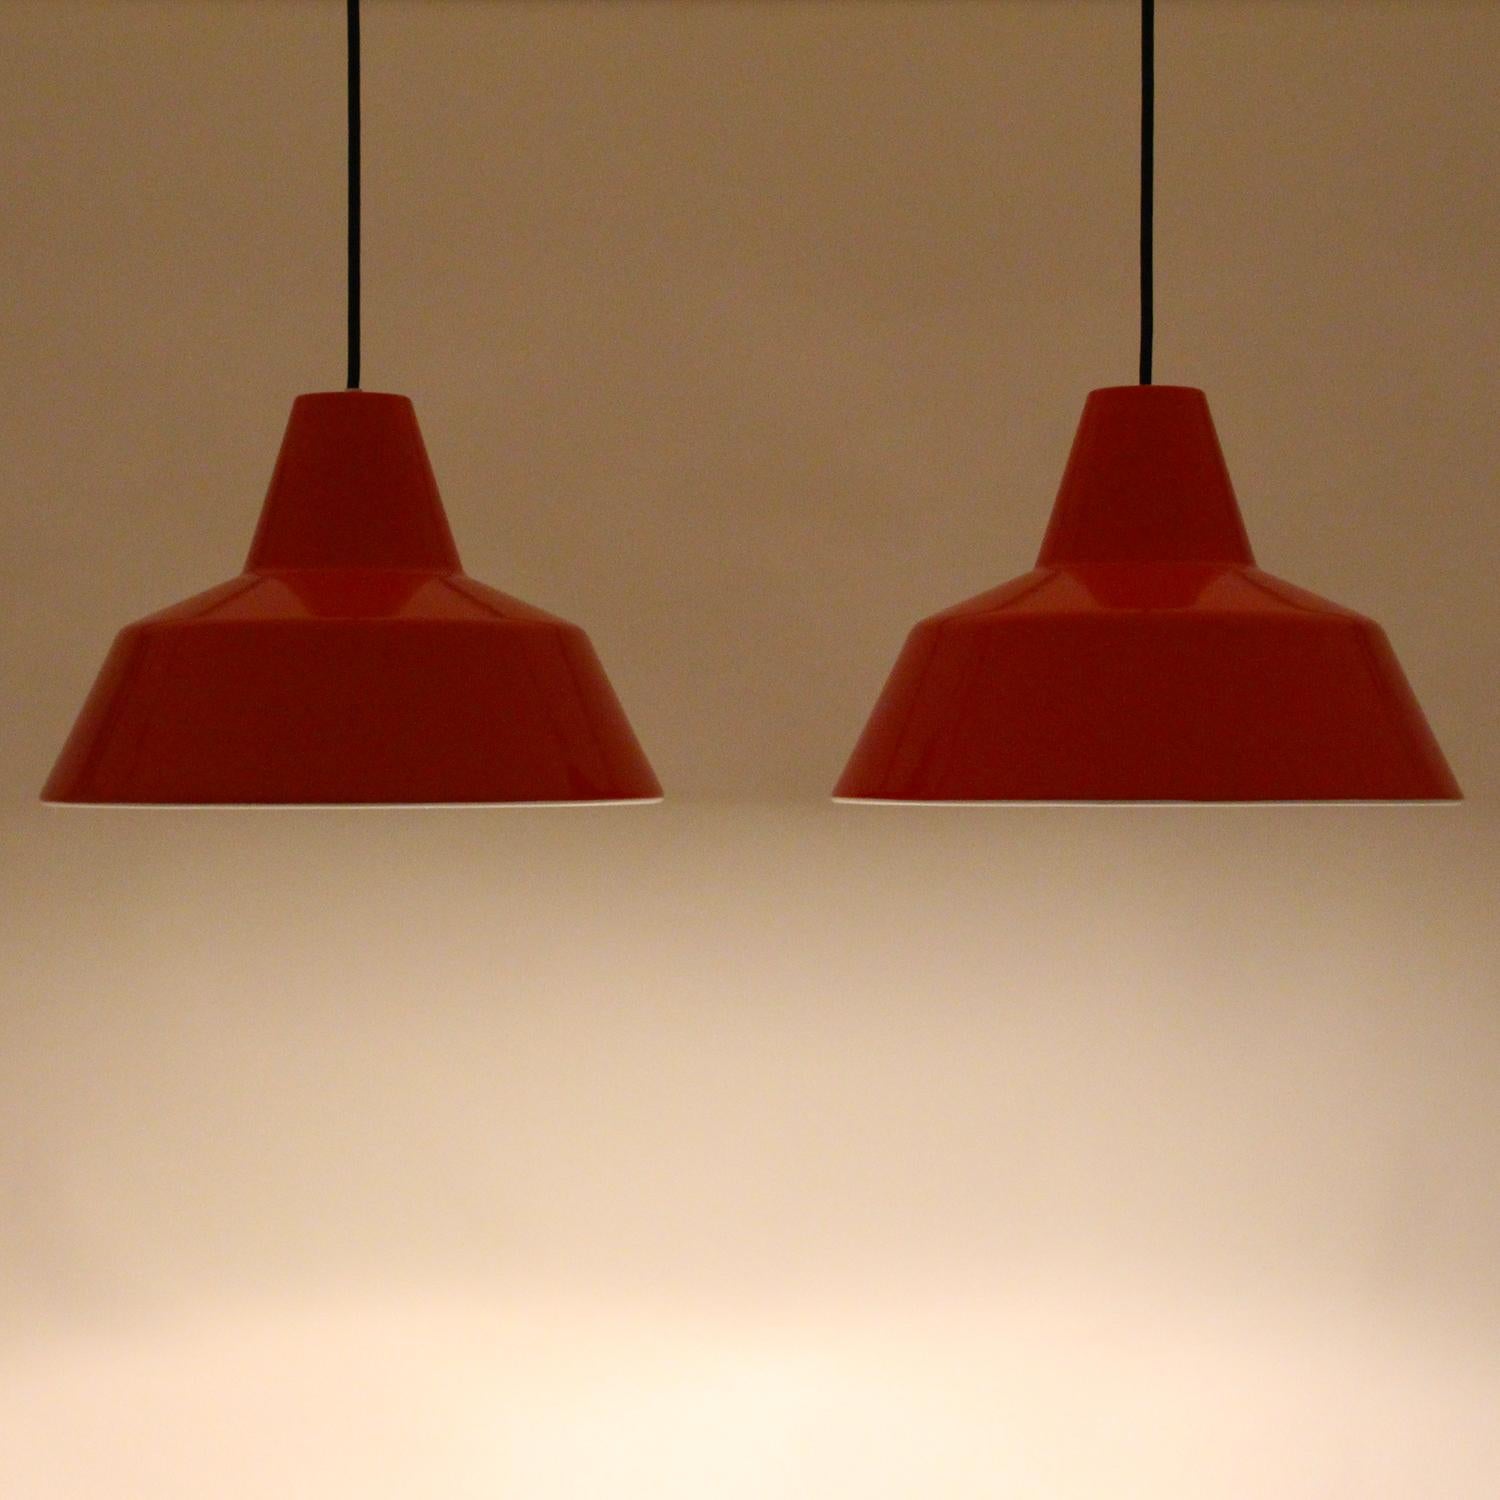 Enamel pendant pair by Louis Poulsen in the 1960s - pair of Classic midcentury Industrial workshop lights with coral red (orange-red) enamel in excellent vintage condition.

Up for sale here is a pair of large ceiling lights, made up by a